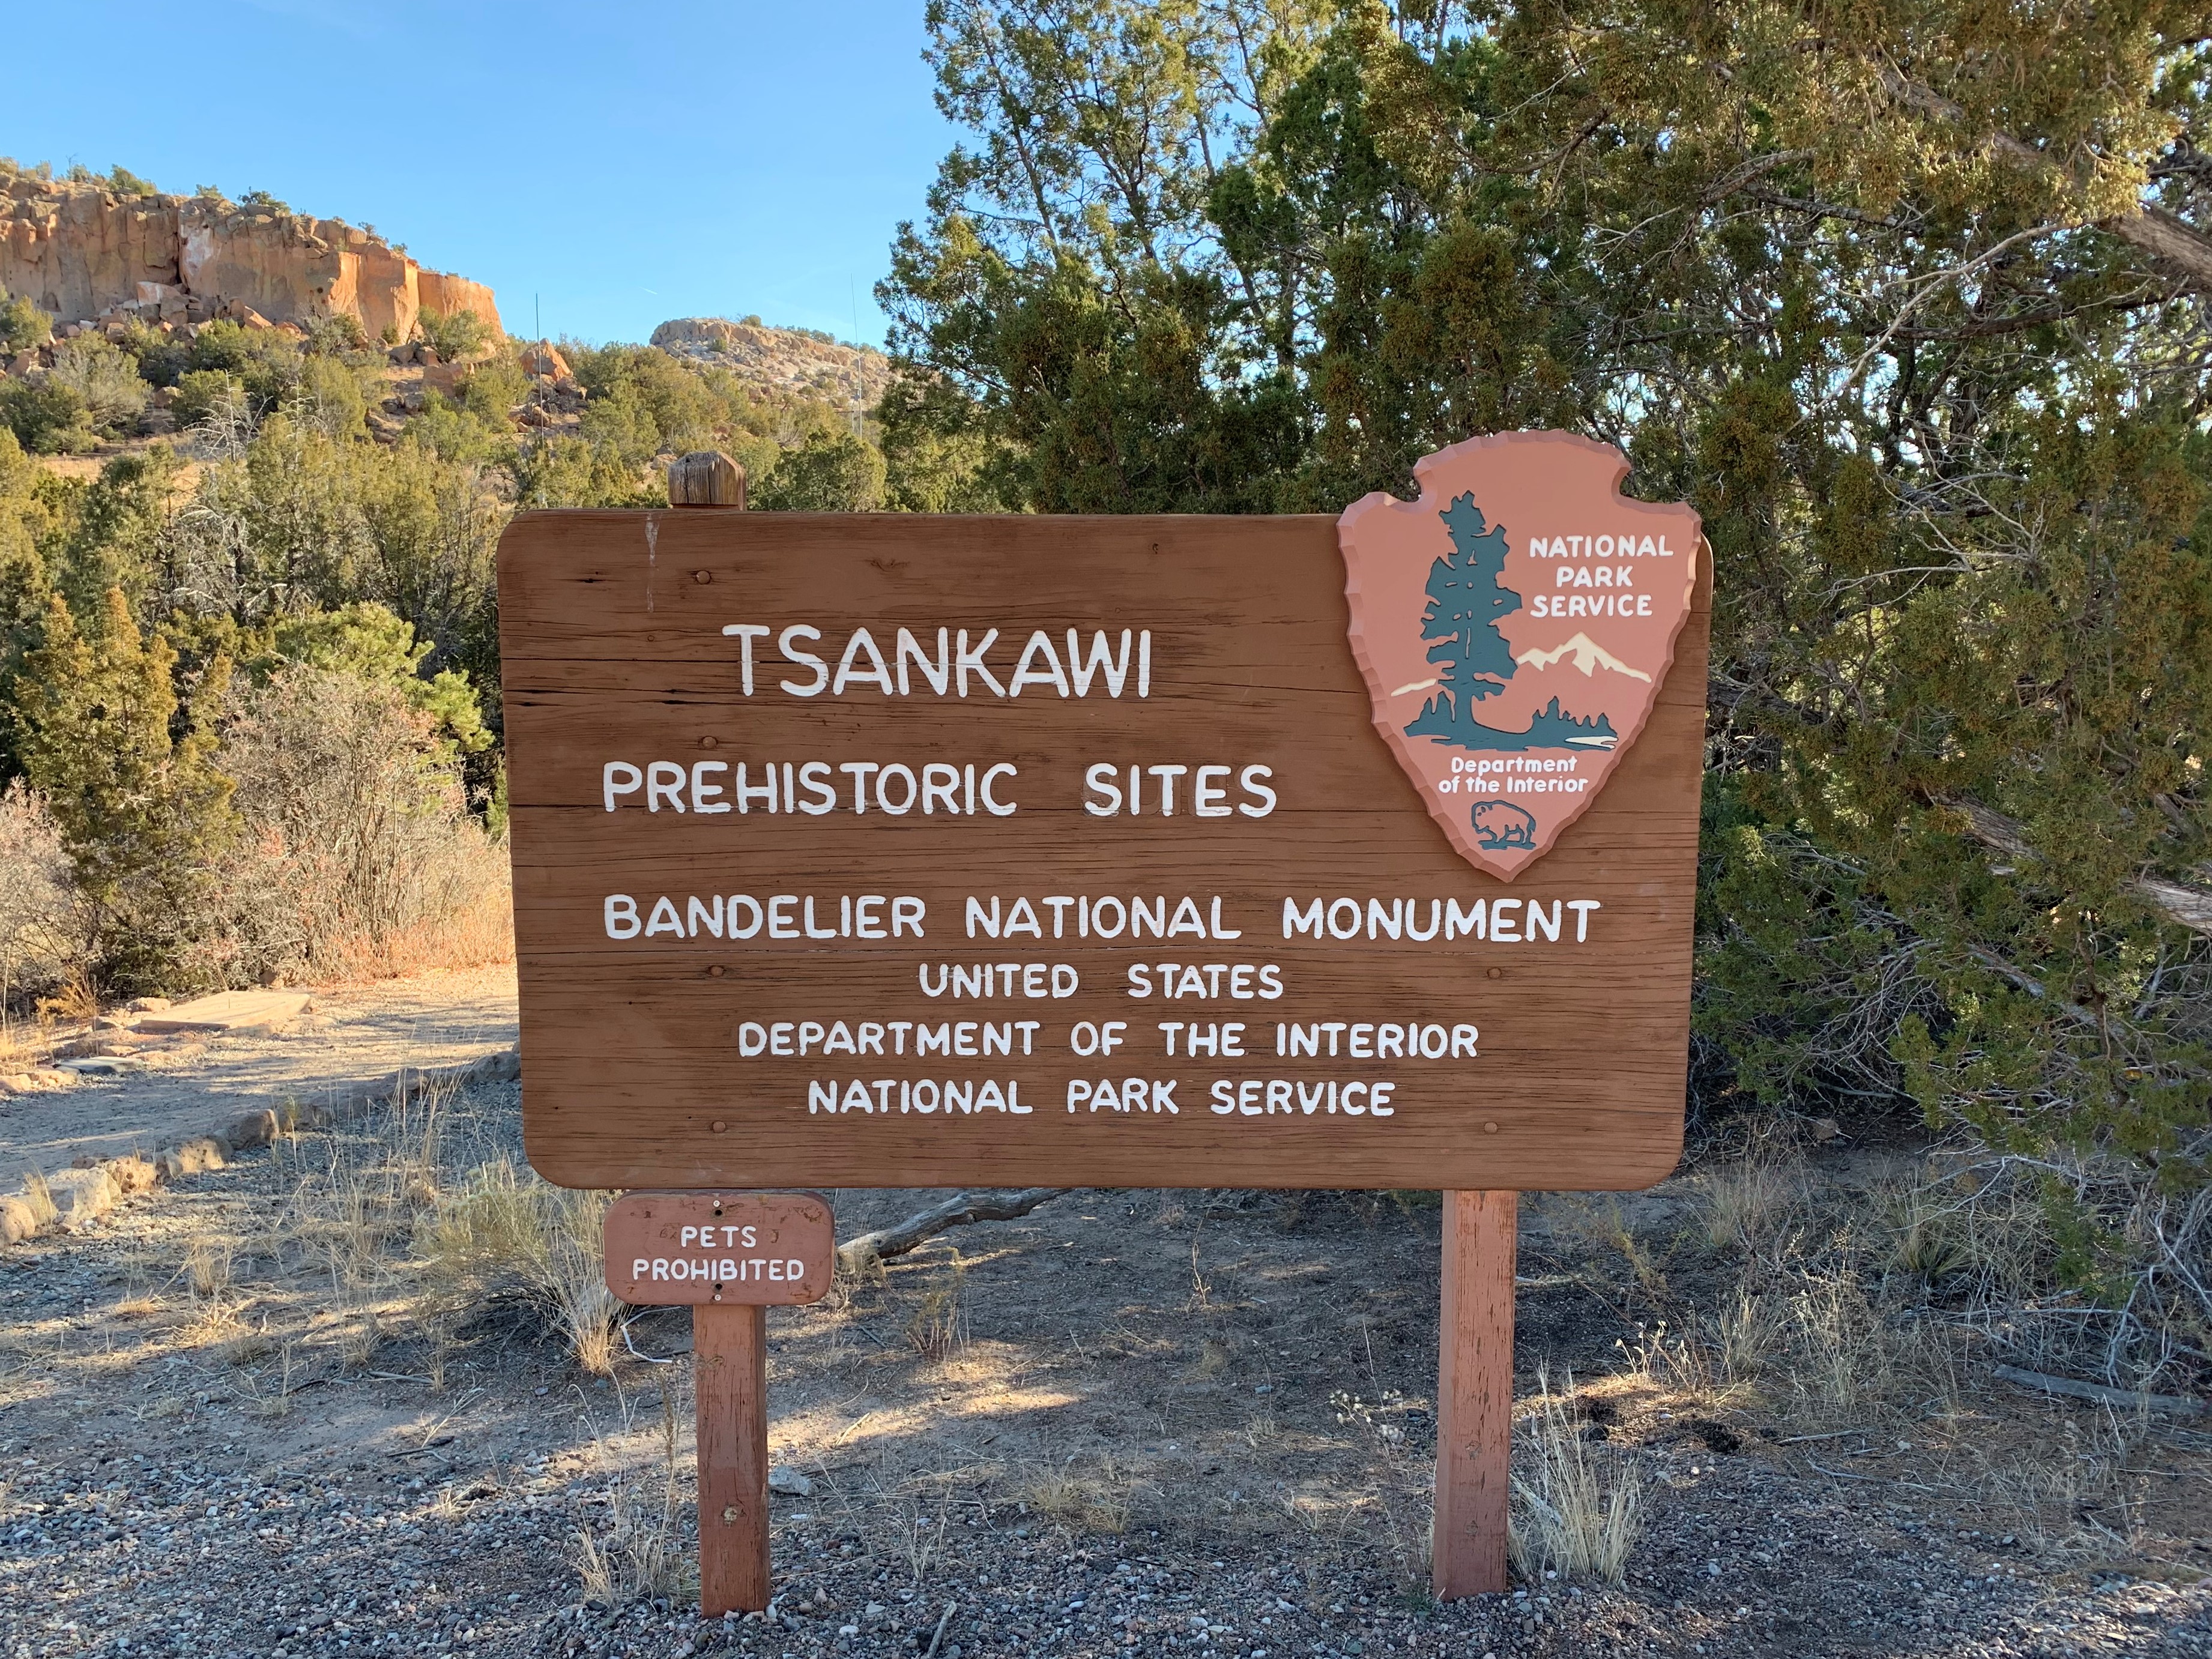 A wooden sign that says, "Tsankawi Prehistoric Sites, Bandelier National Monument, United States Department of the Interior, National Park Service." Behind it are trees with green foliage. The sky is blue.